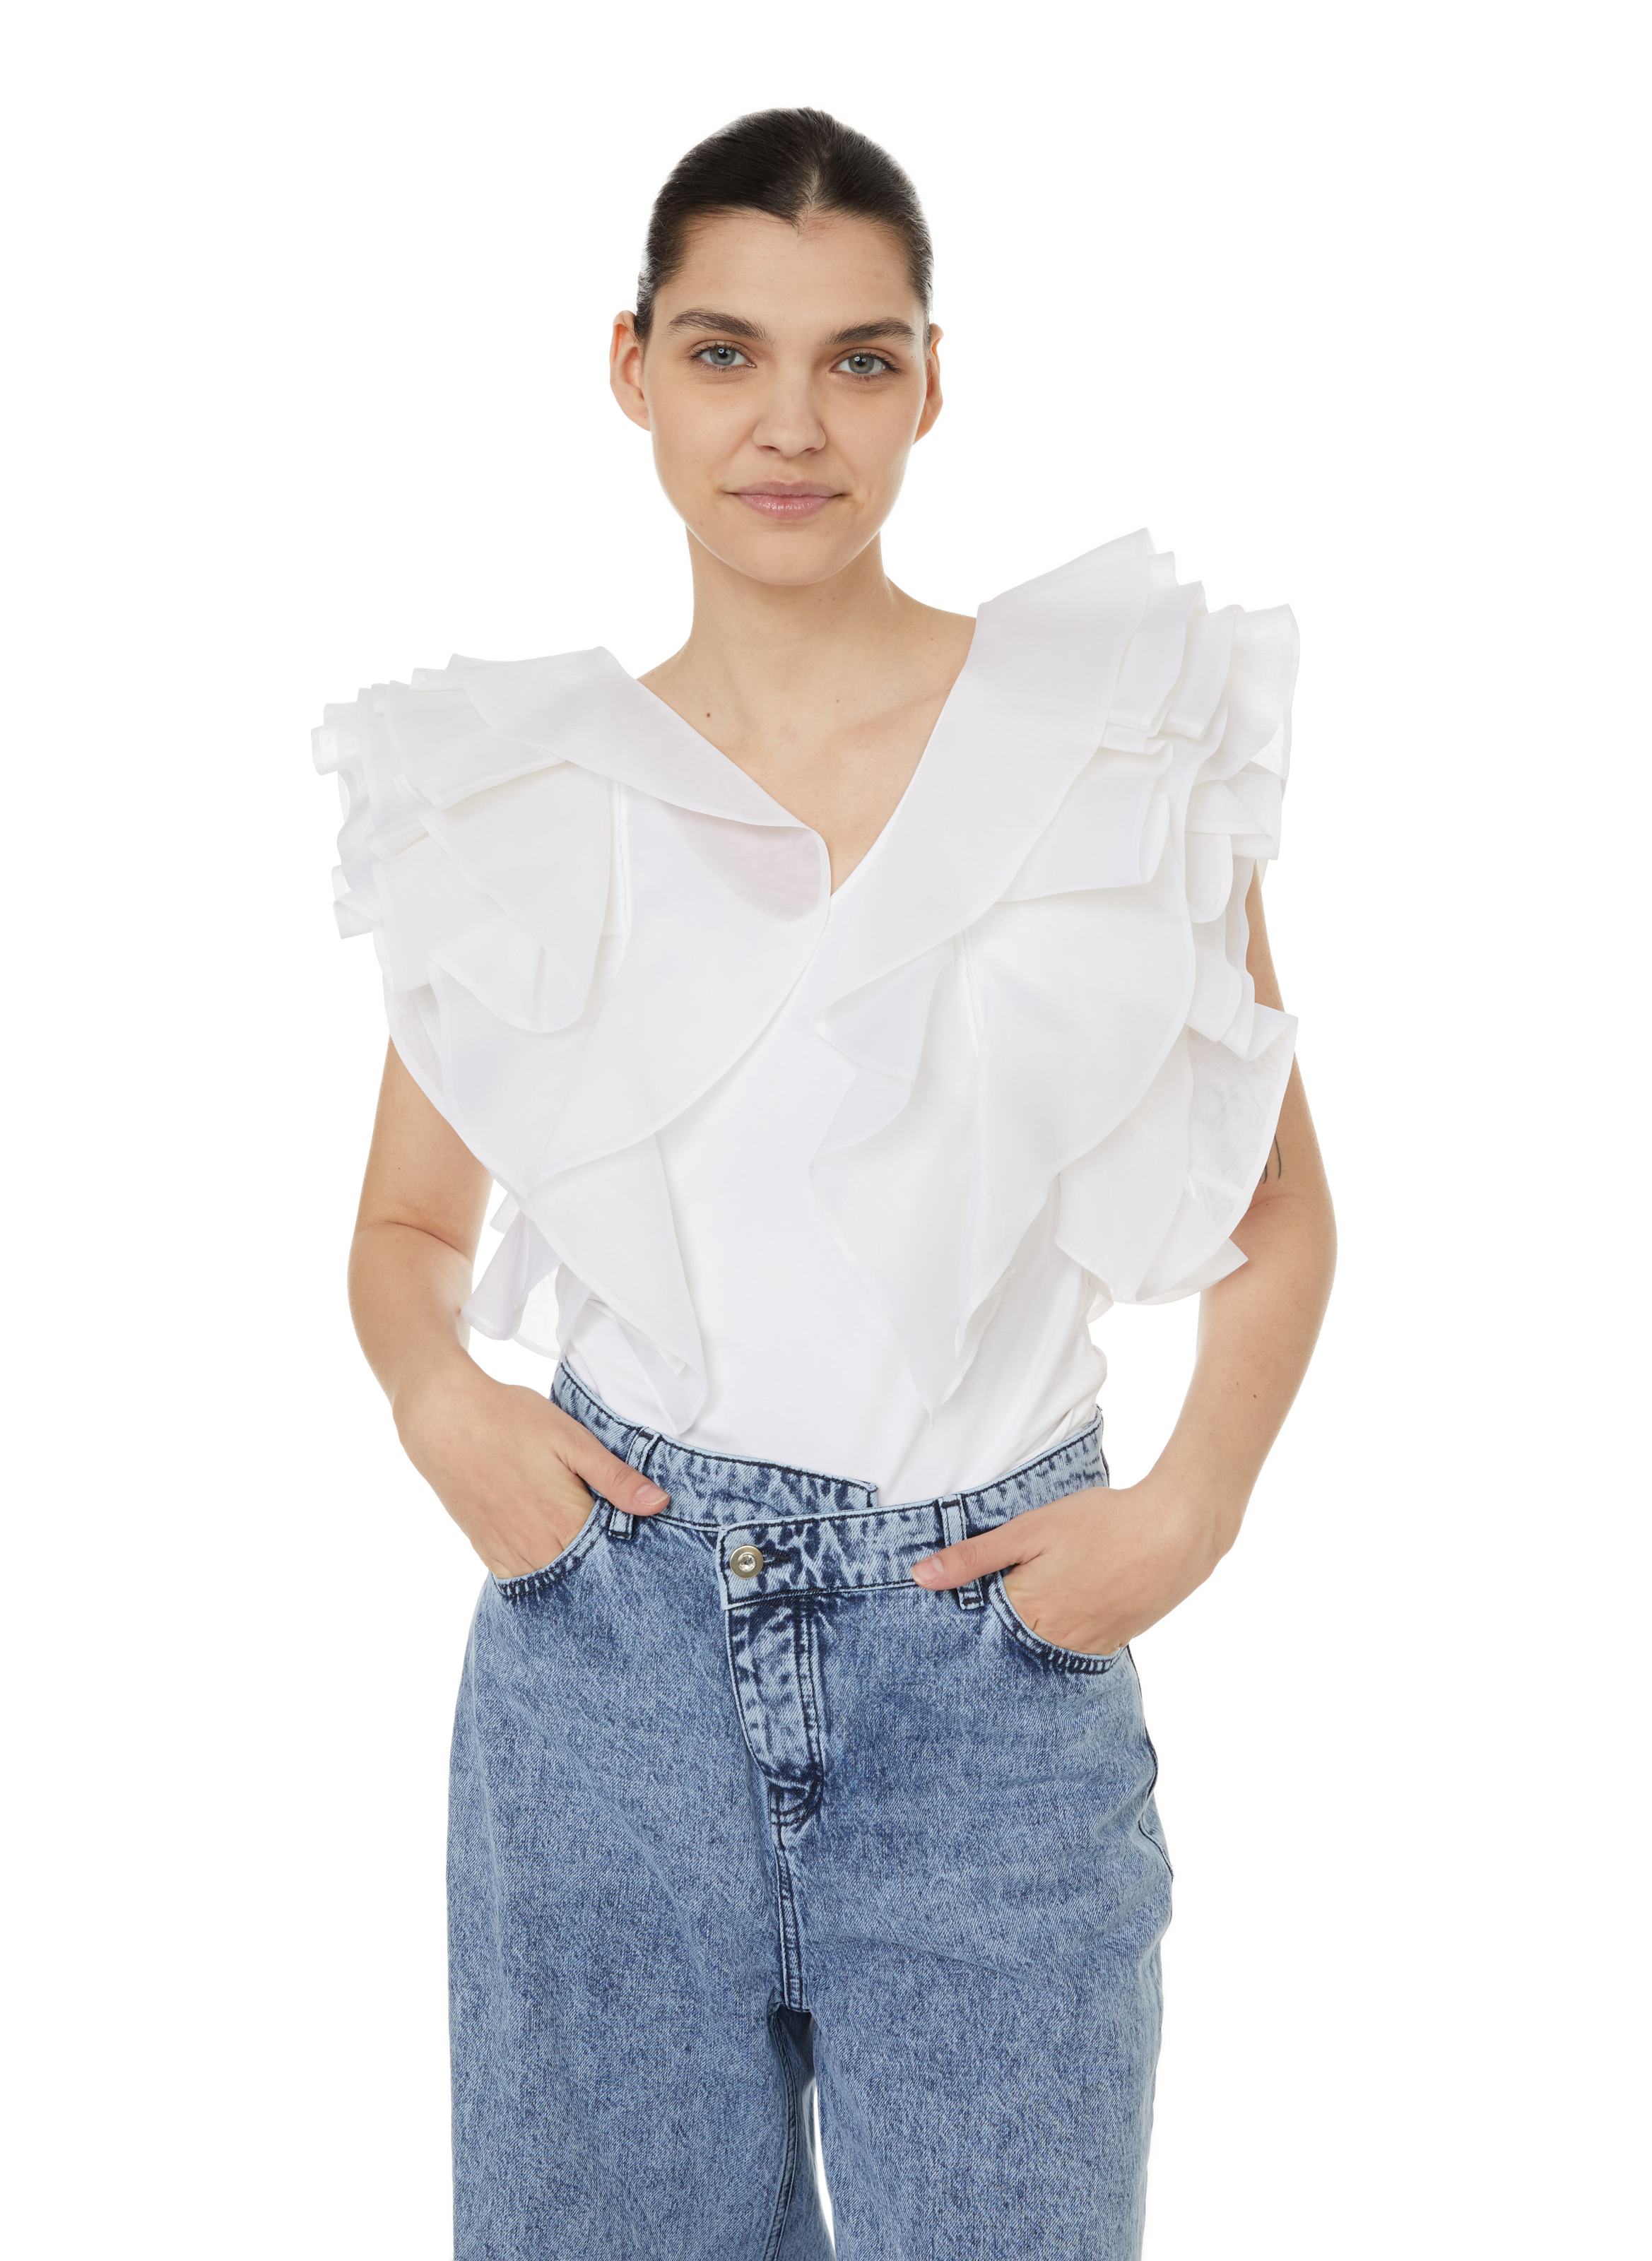 S, T1 Chemisiers Anne Fontaine Femme Chemisier ANNE FONTAINE 36 blanc Femme Vêtements Anne Fontaine Femme Hauts Anne Fontaine Femme Blouses & Chemises  Anne Fontaine Femme Chemisiers Anne Fontaine Femme 